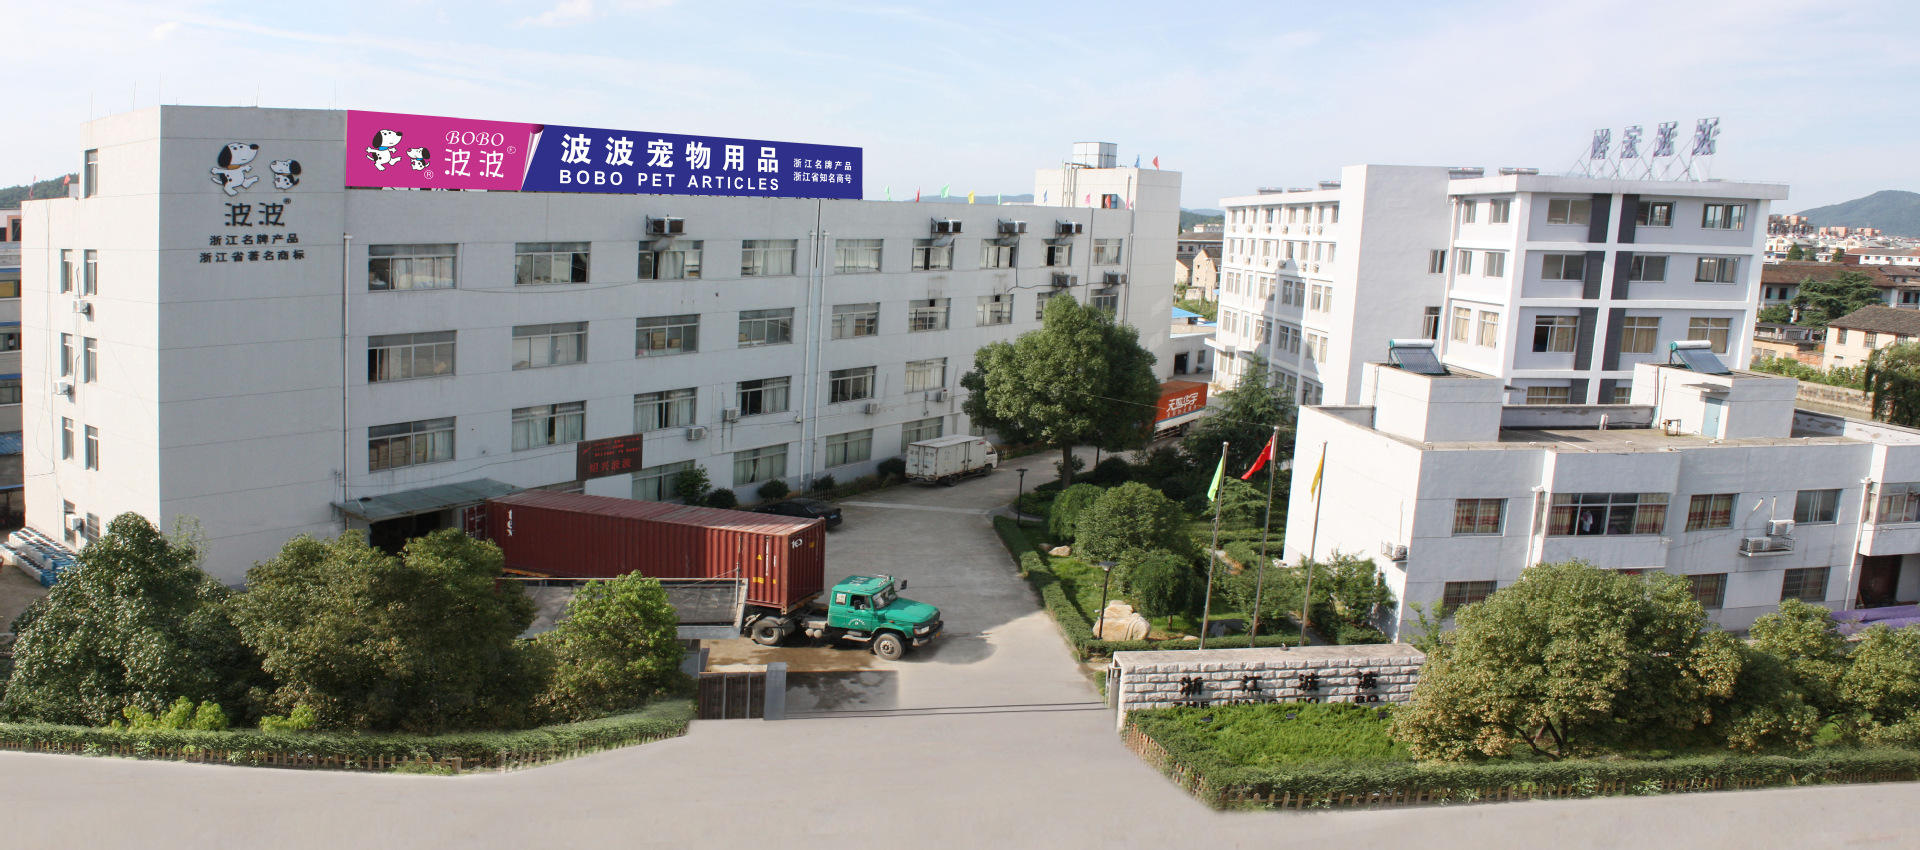     Shaoxing Bobo Pet Products Factory